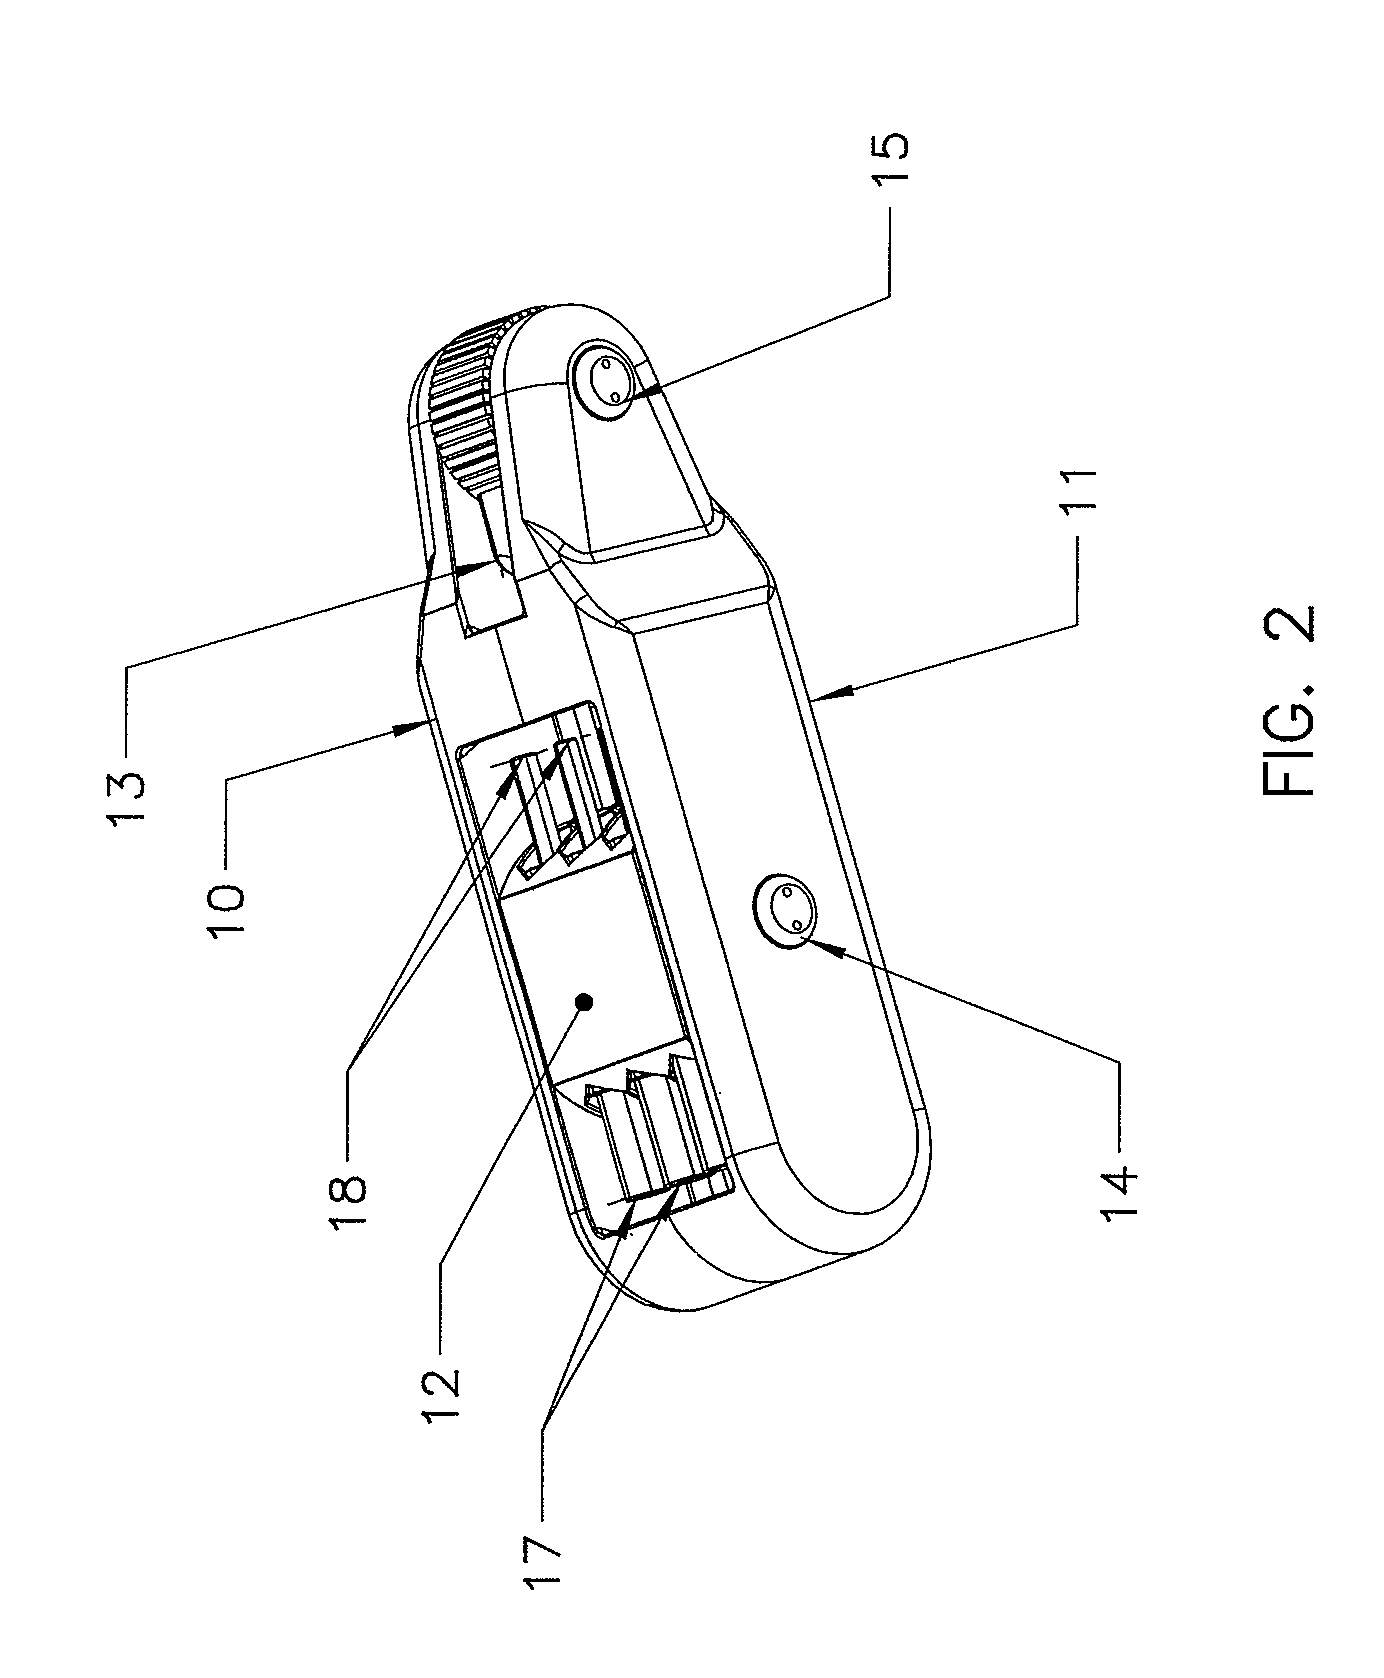 High density tool and locking system